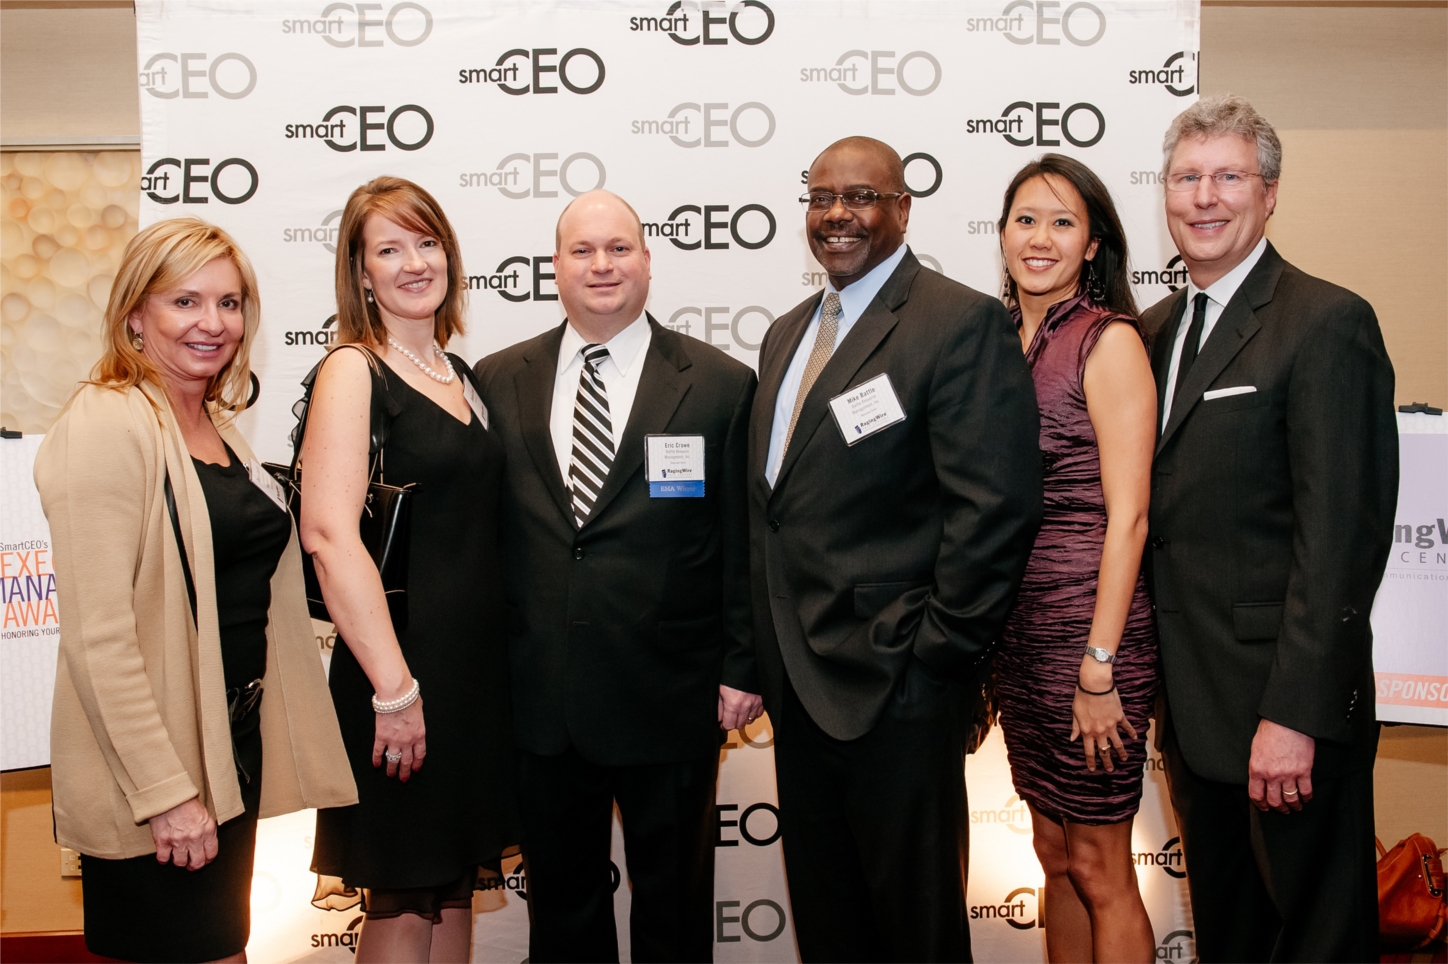 The BRMi team celebrating CFO Eric Crowe's recent win at the SmartCEO Executive Management Awards.  